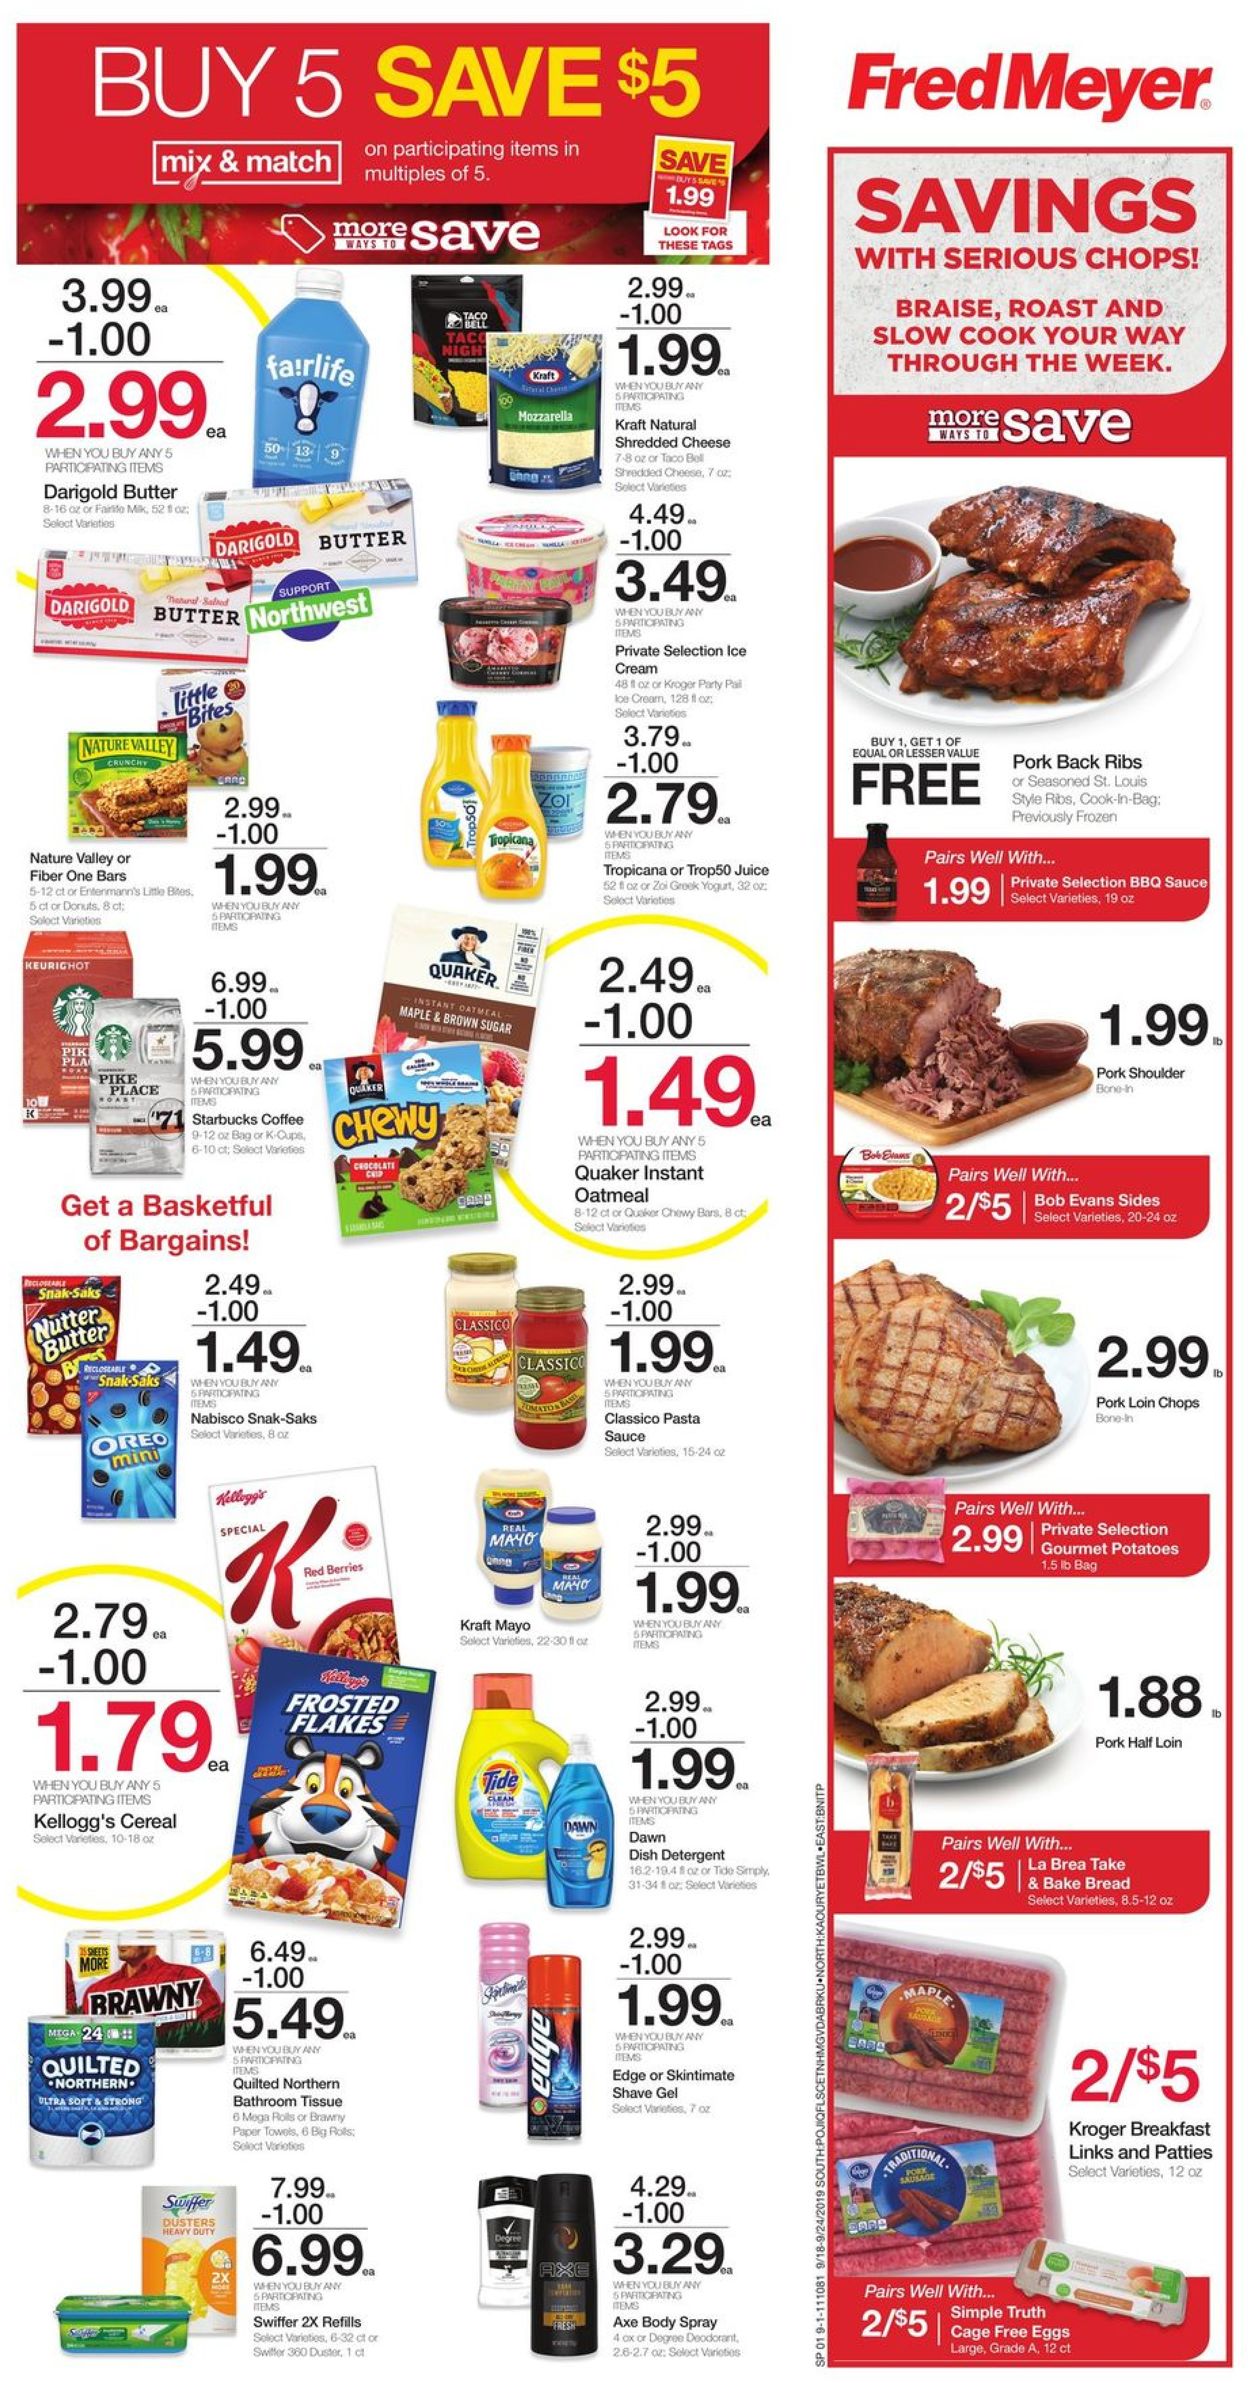 Fred Meyer Weekly Ad Circular - valid 09/18-09/24/2019 (Page 2)